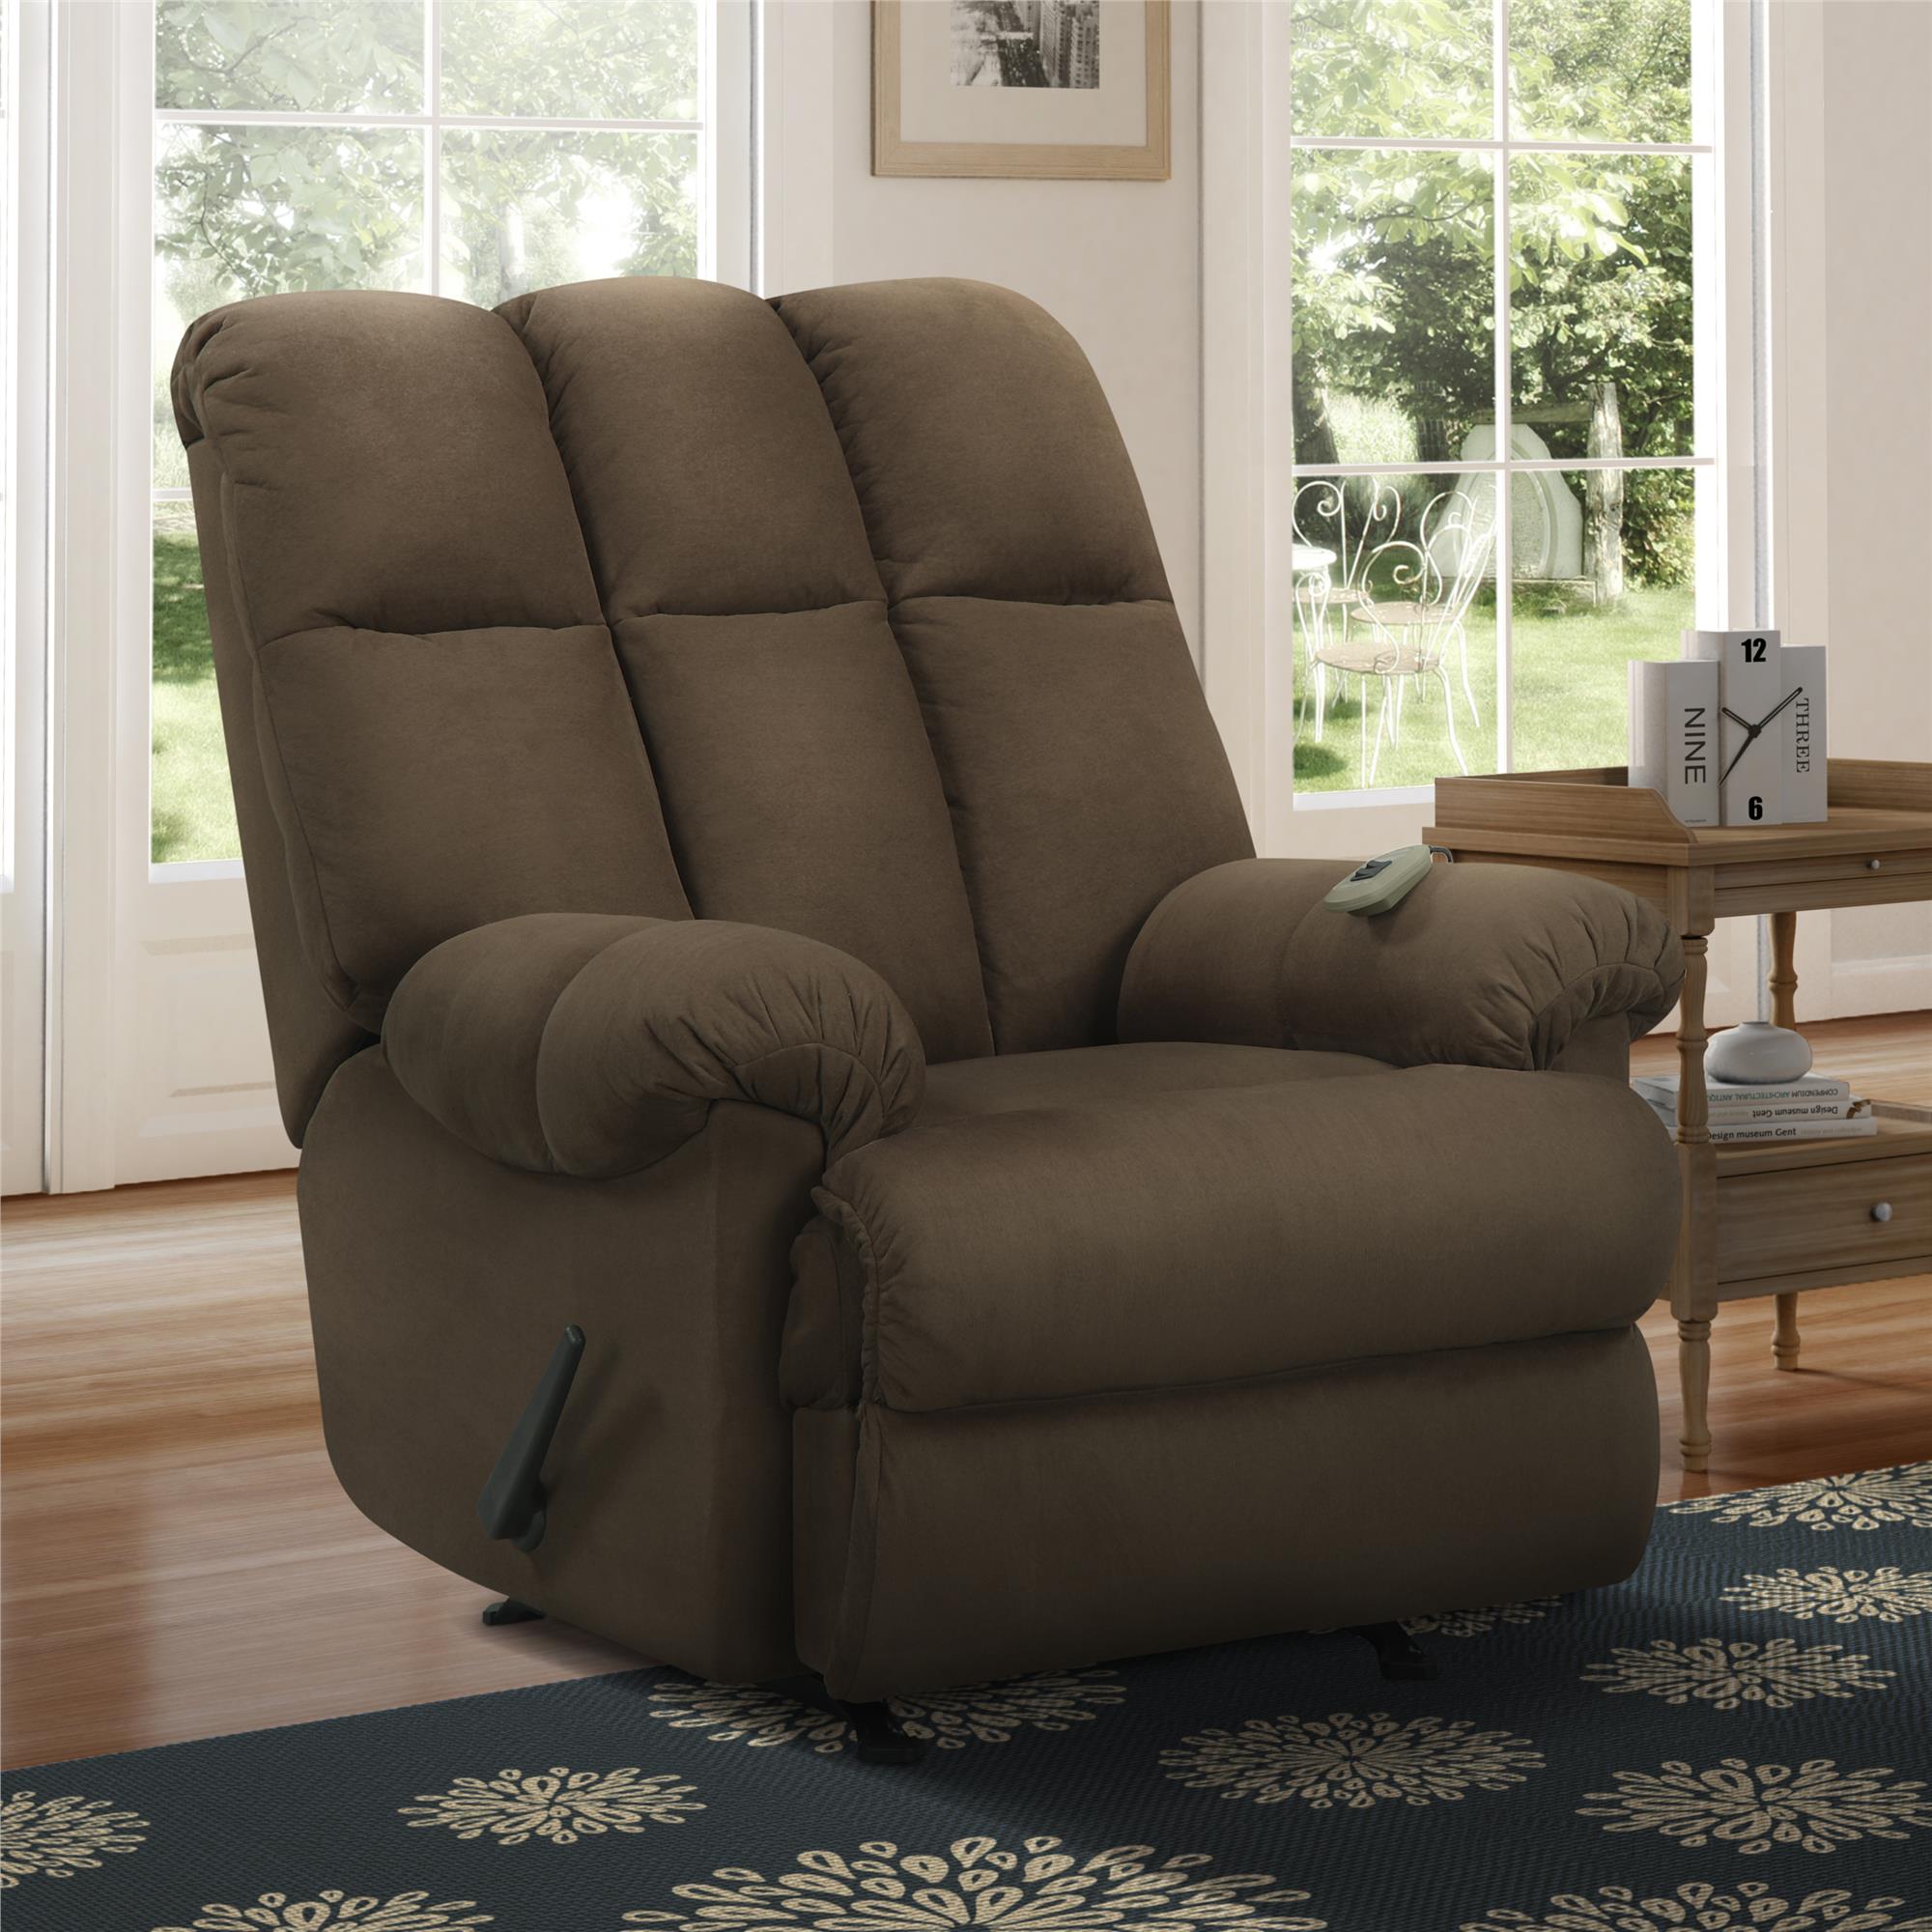 Elm & Oak Padded Massage Chair Recliner, Chocolate Upholstery - image 1 of 12